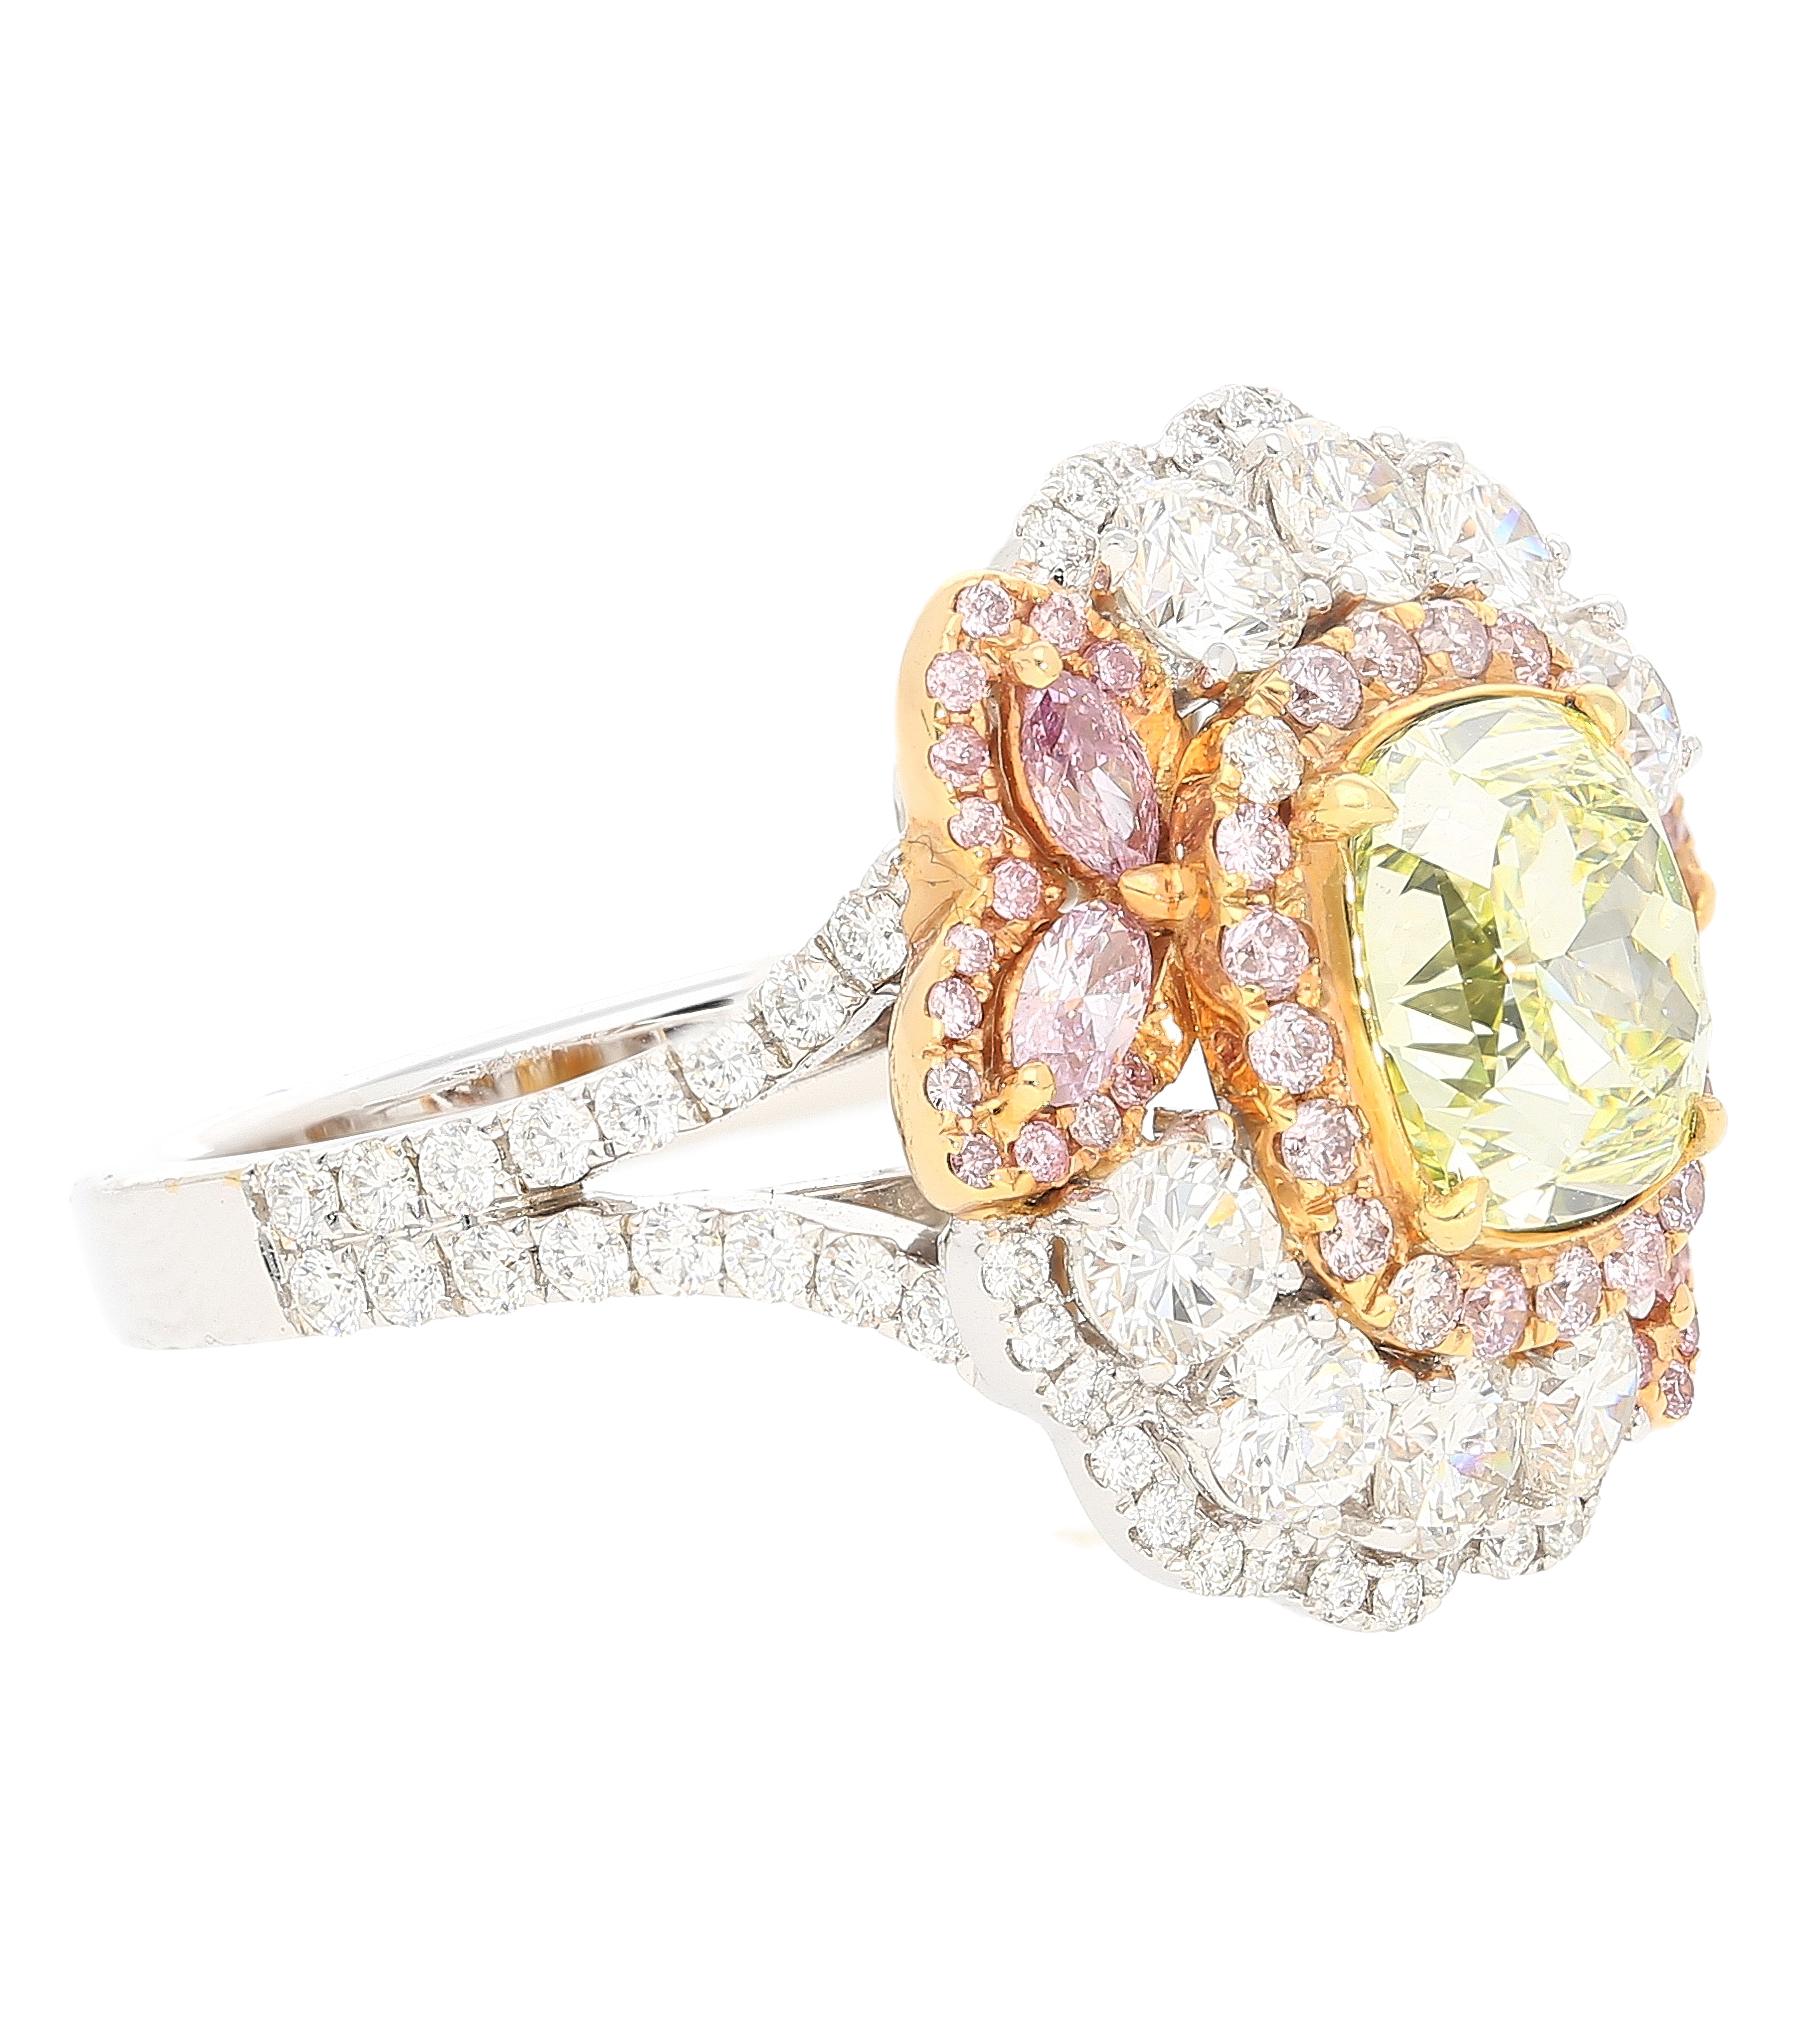 GIA Certified 2.02 Carat Cushion Cut Fancy Greenish Yellow Diamond Ring. Set with a colorful array of mixed-cut pink and white diamonds. This ring is a glowing piece of top-quality natural diamonds from around the world. Set in 18k white gold with